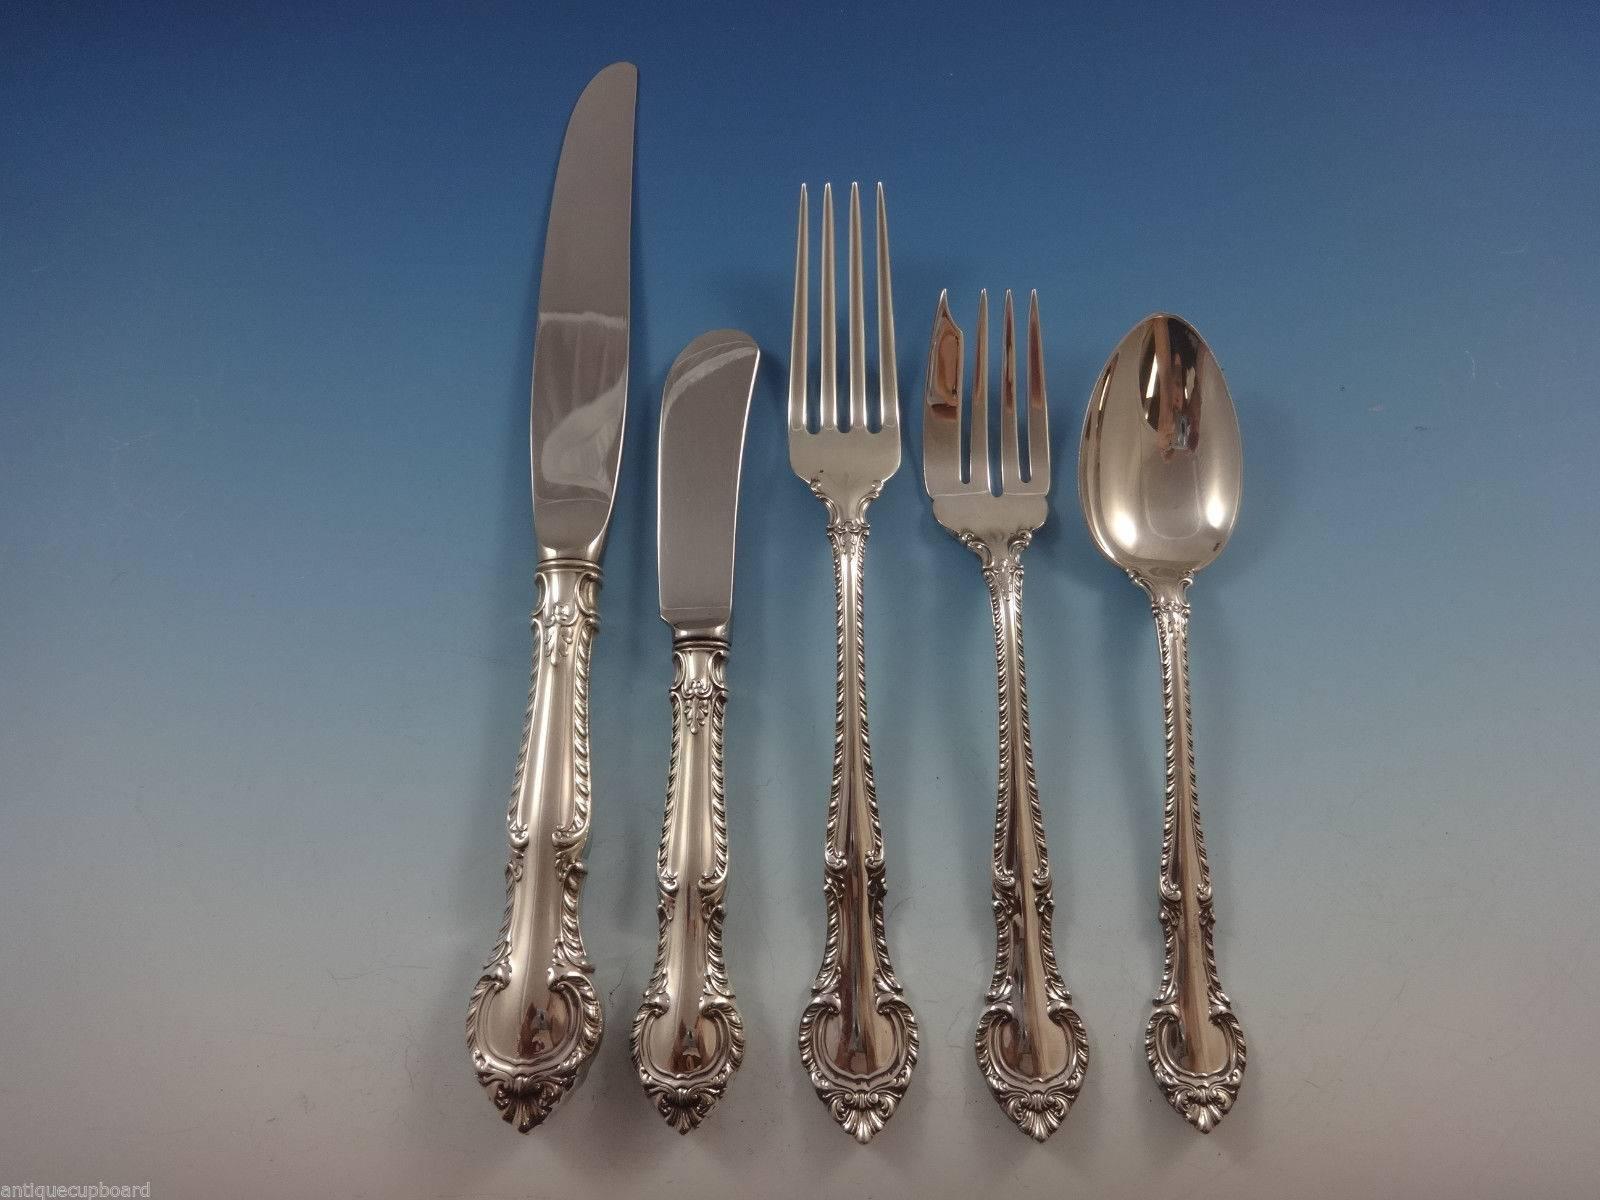 English Gadroon by Gorham Sterling Silver Flatware Set - 43 pieces. This set includes: 

8 KNIVES, 9